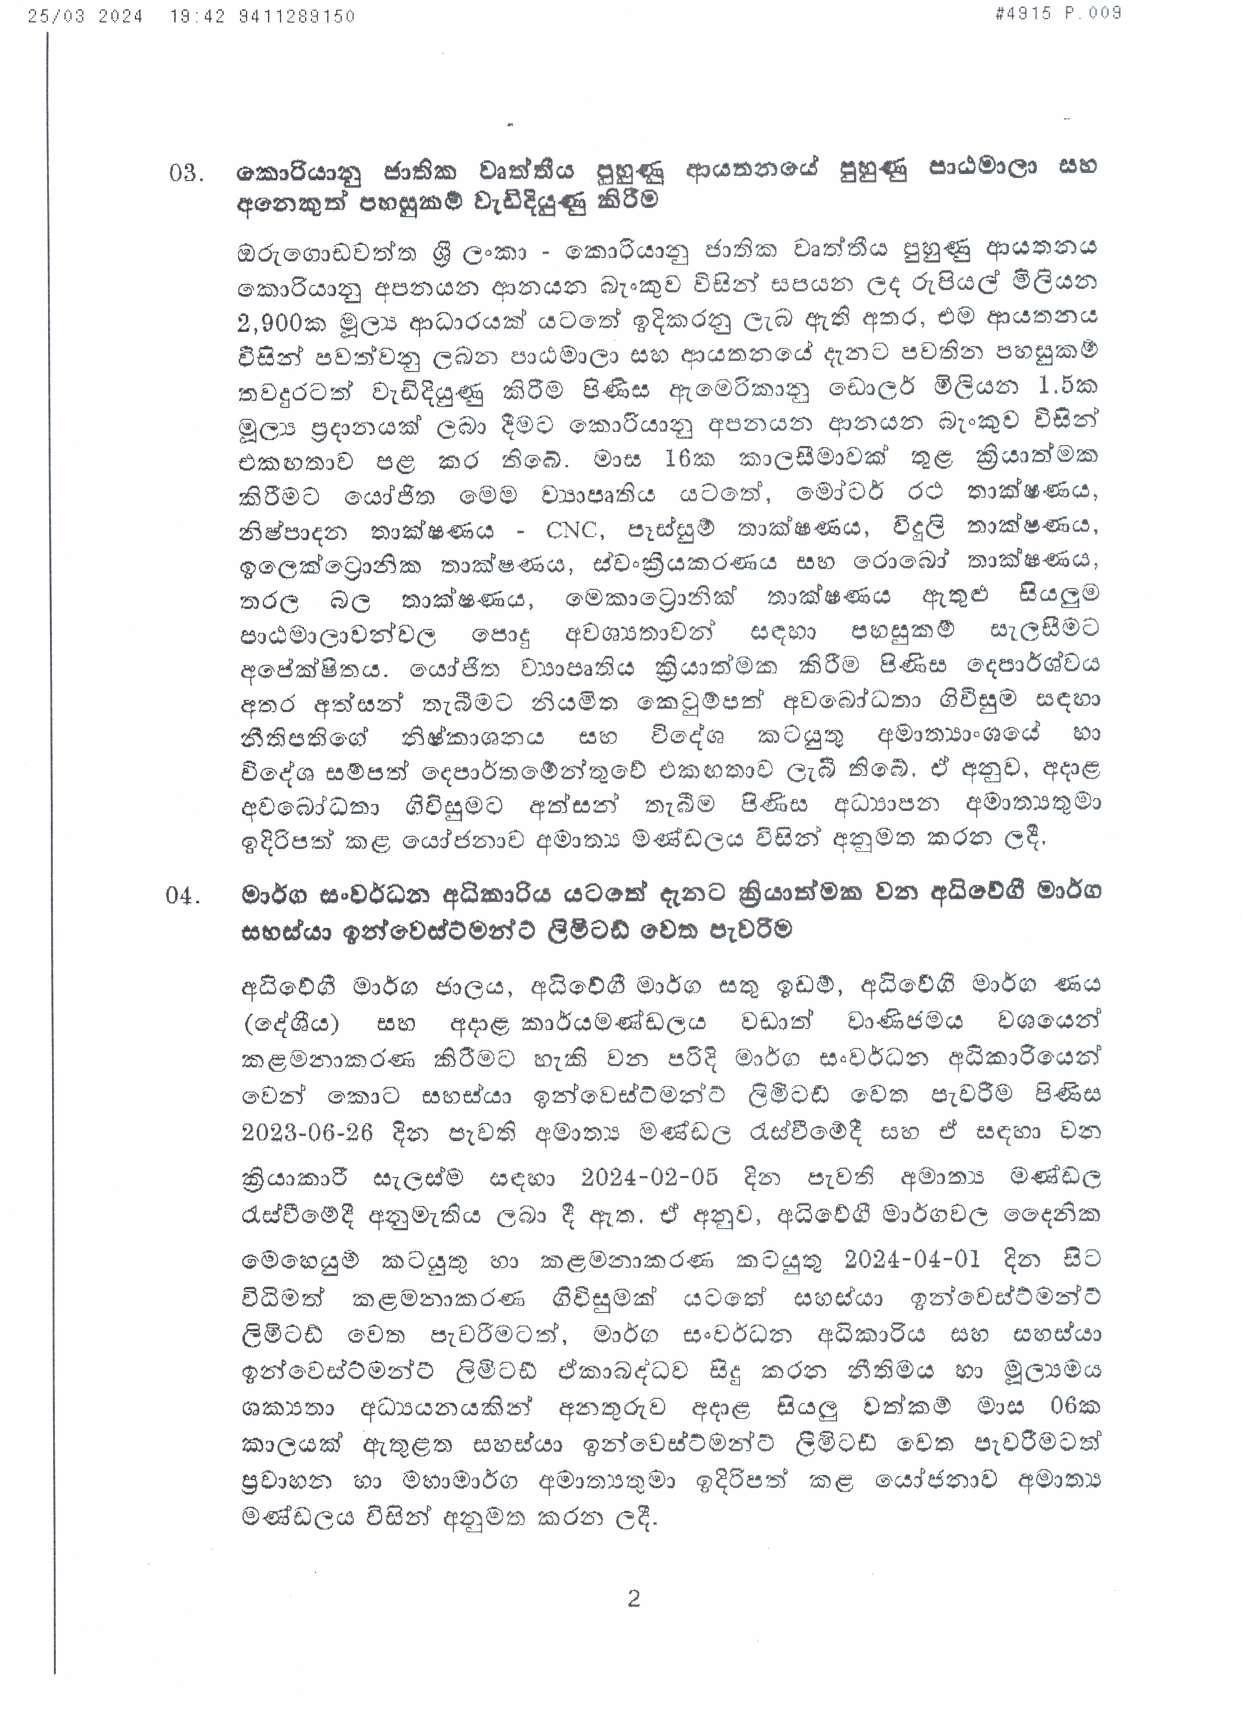 Cabinet Decision on 25.03.2024 page 002